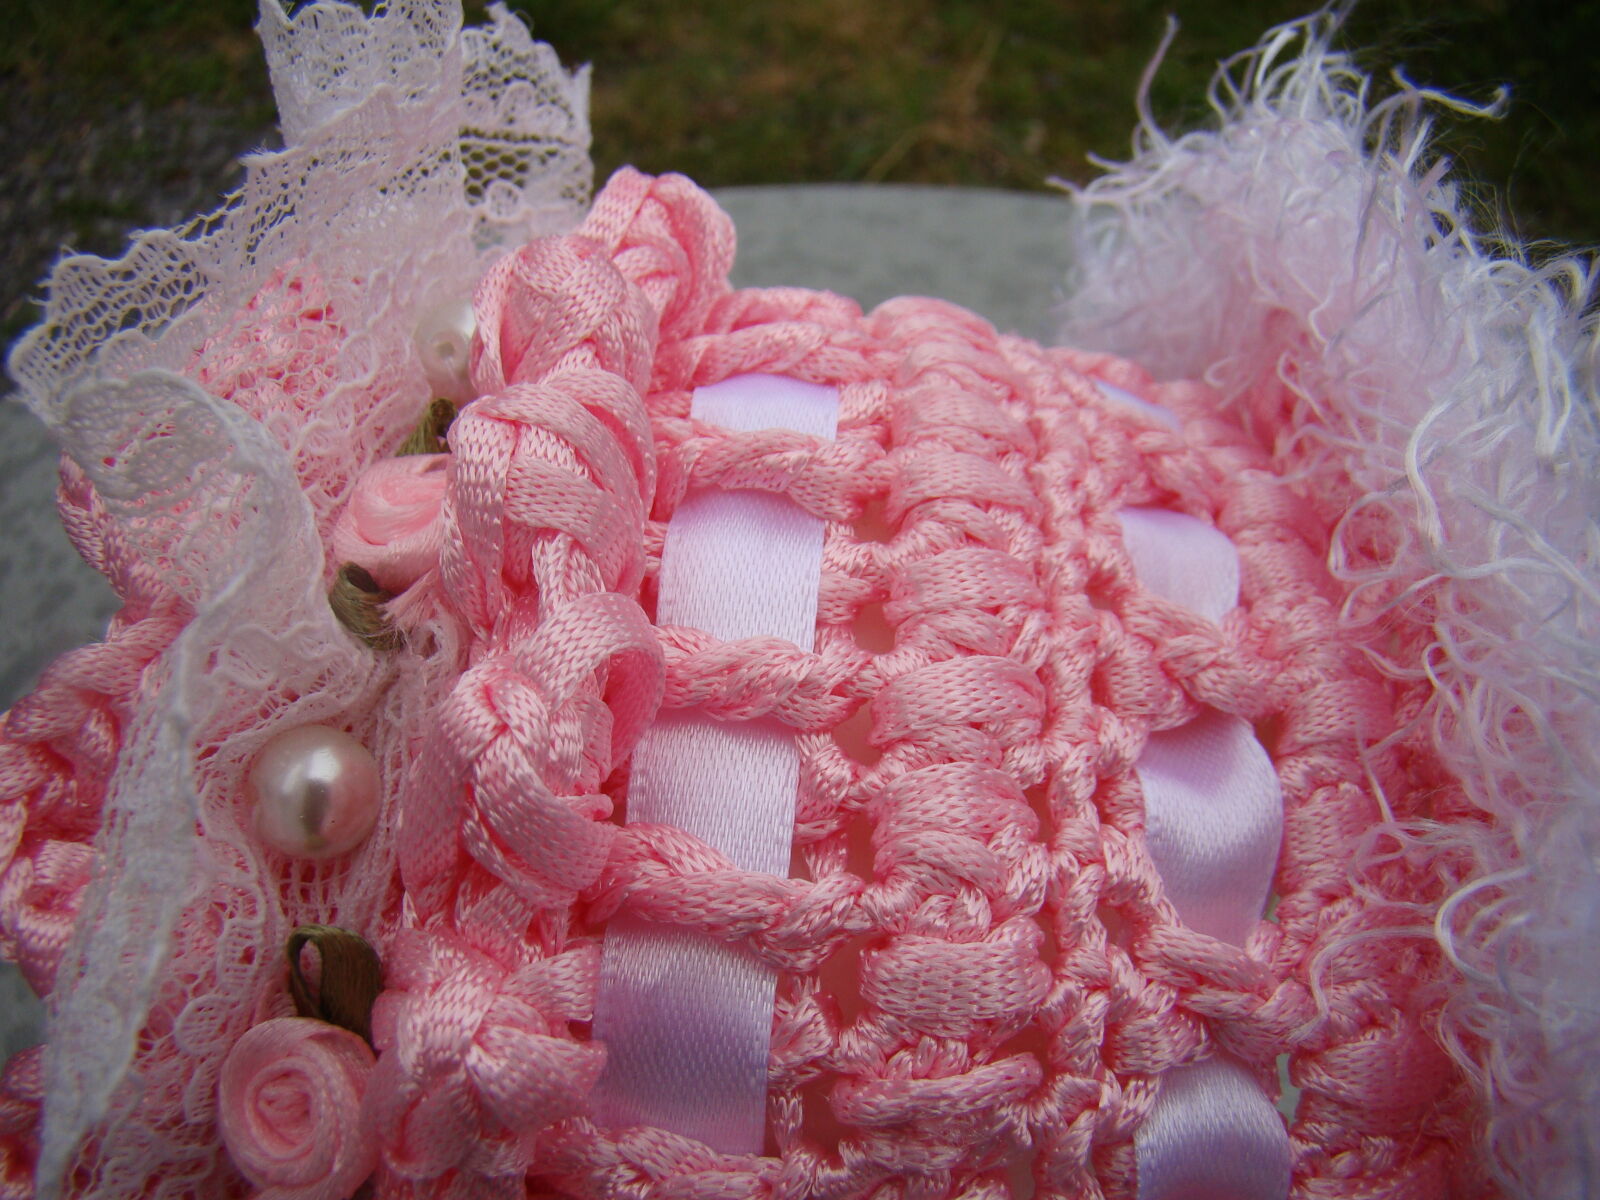 Sony Cyber-shot DSC-H50 sample photo. Crochet, lace, pearls, pink photography